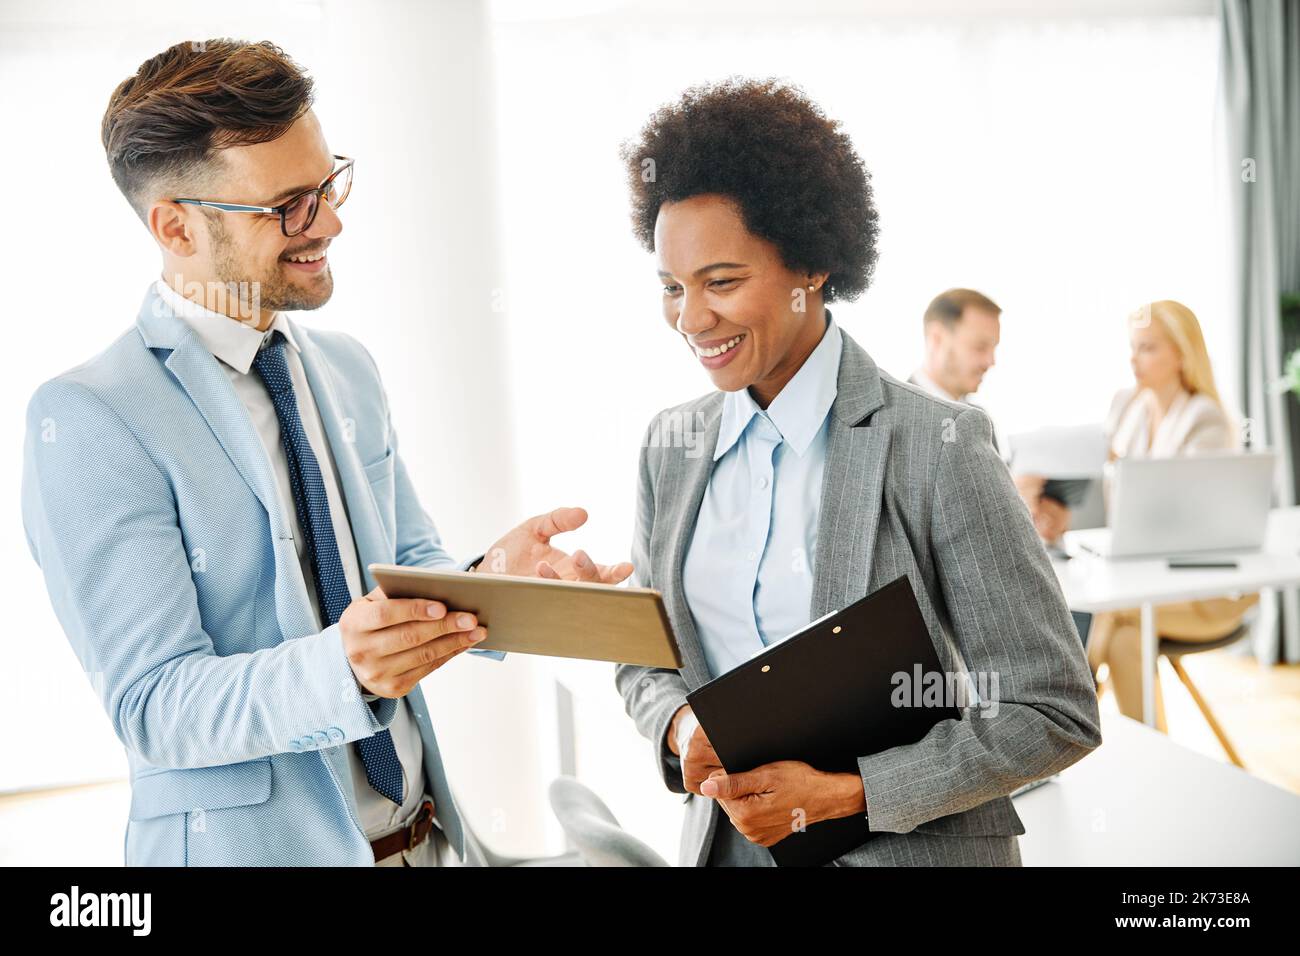 young business people meeting office teamwork group success corporate discussion tablet document Stock Photo